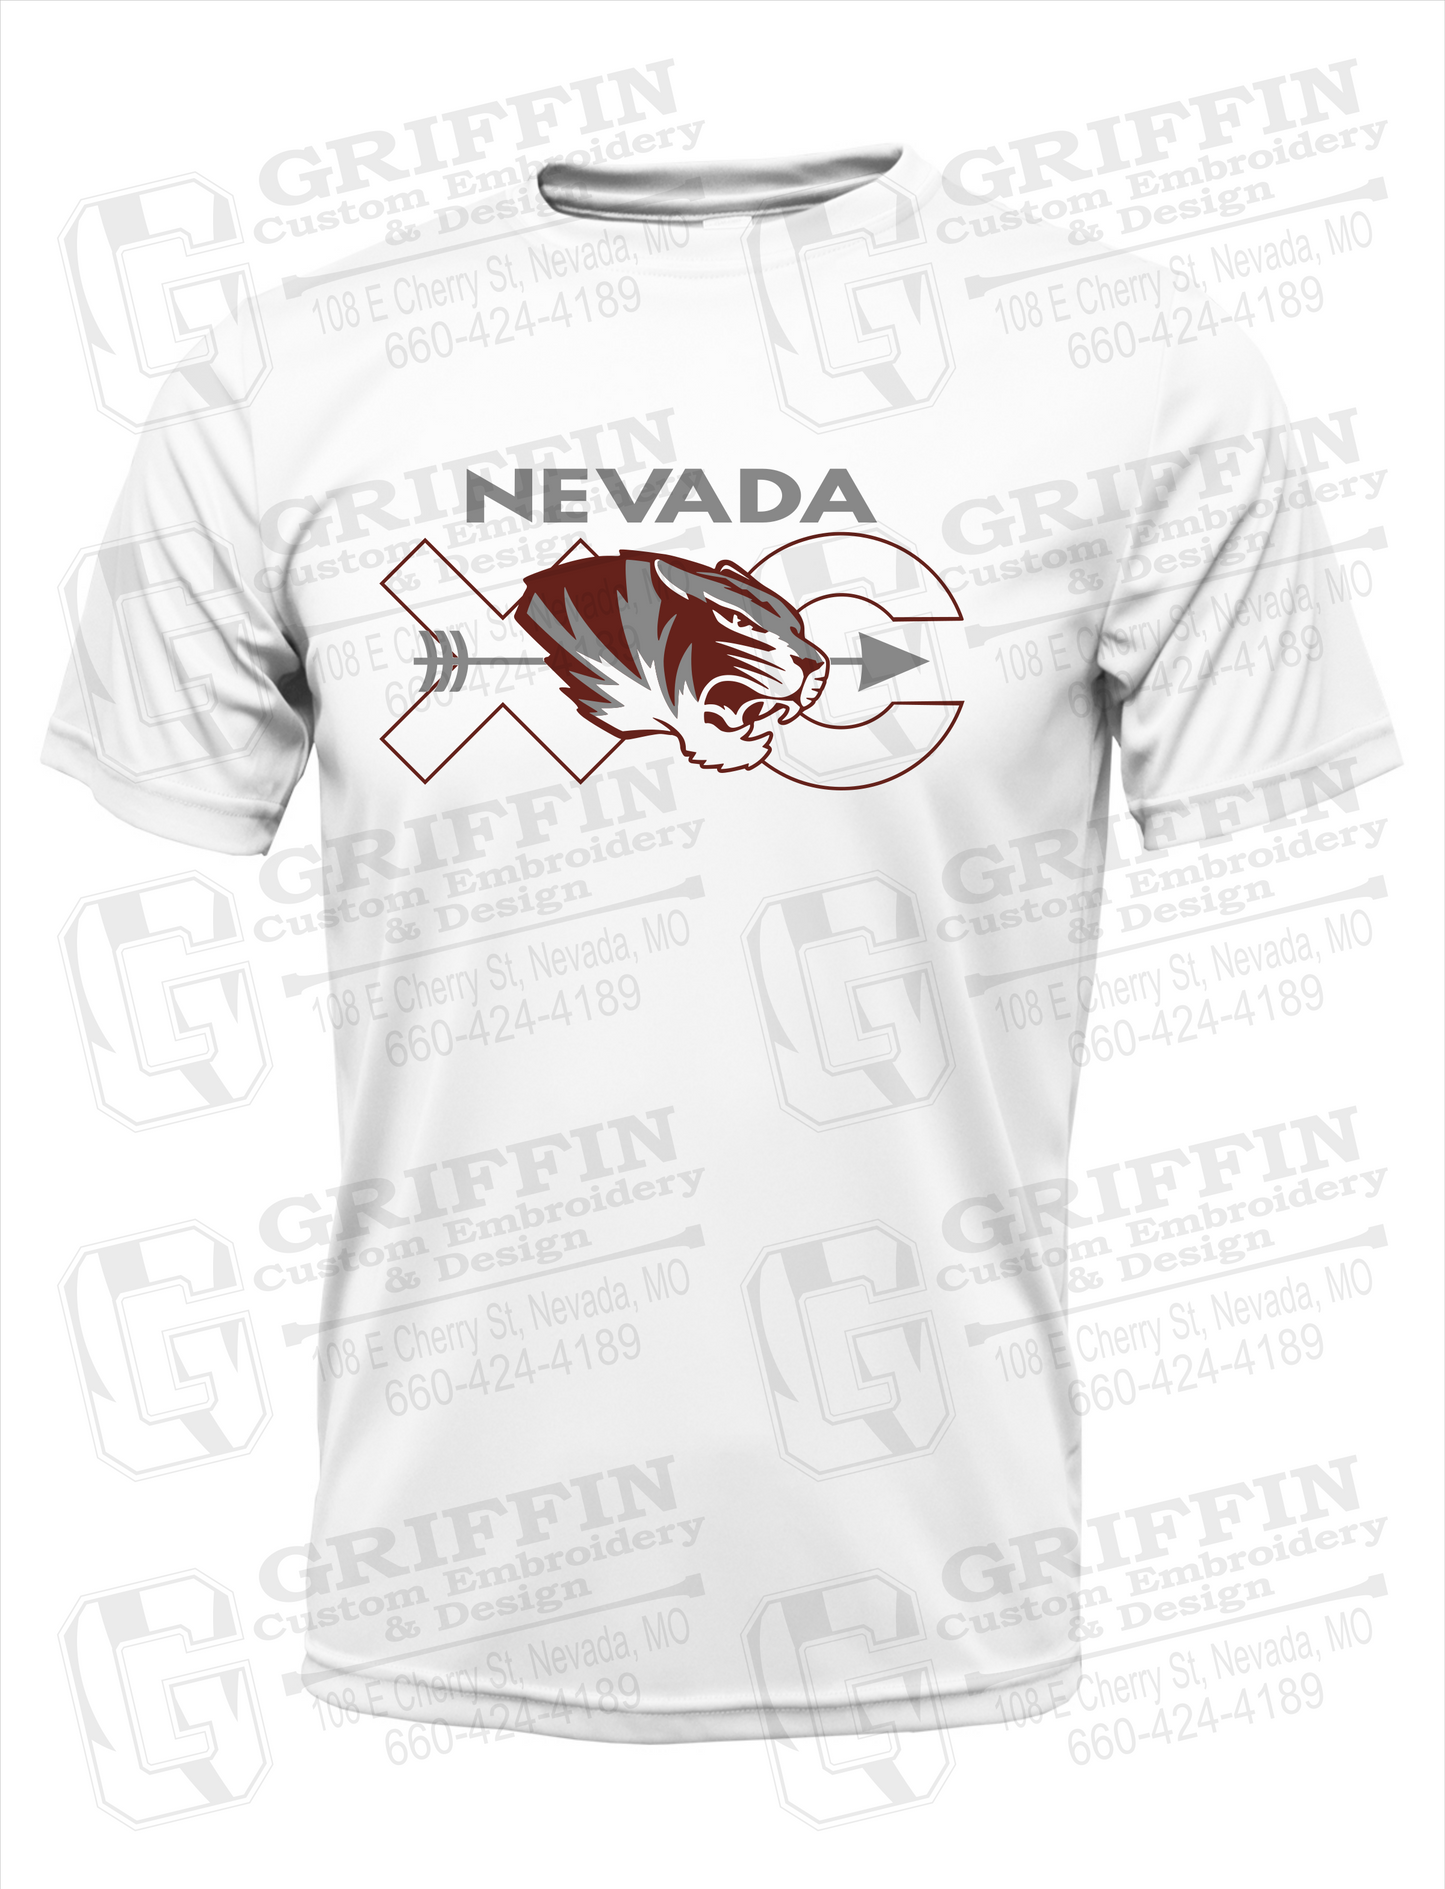 Nevada Tigers 23-T Dry-Fit T-Shirt - Cross Country